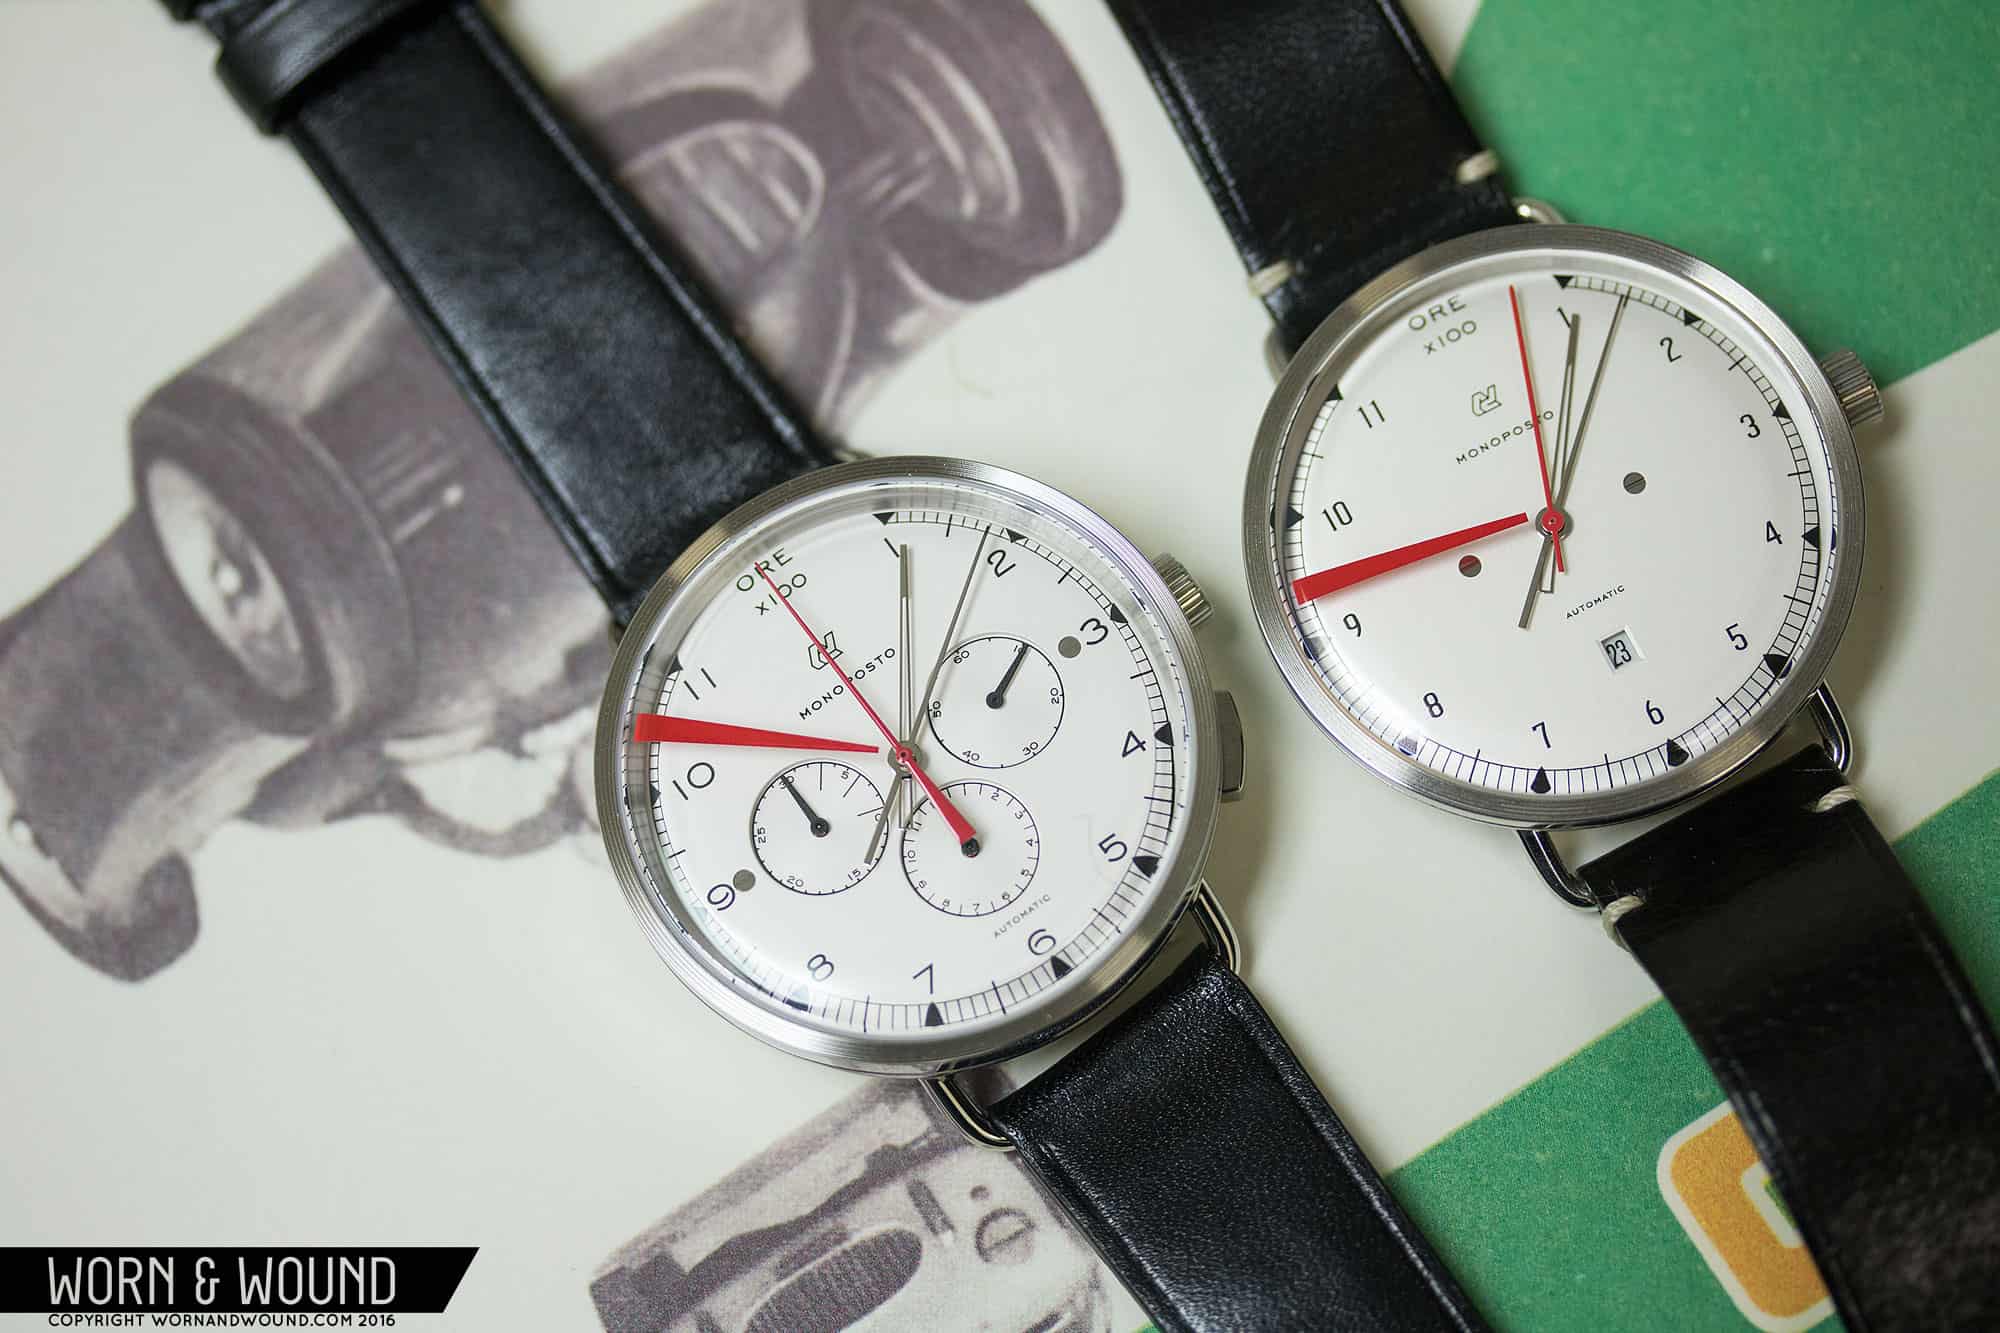 Autodromo Monoposto Chronograph - This Watch Is Inspired by the